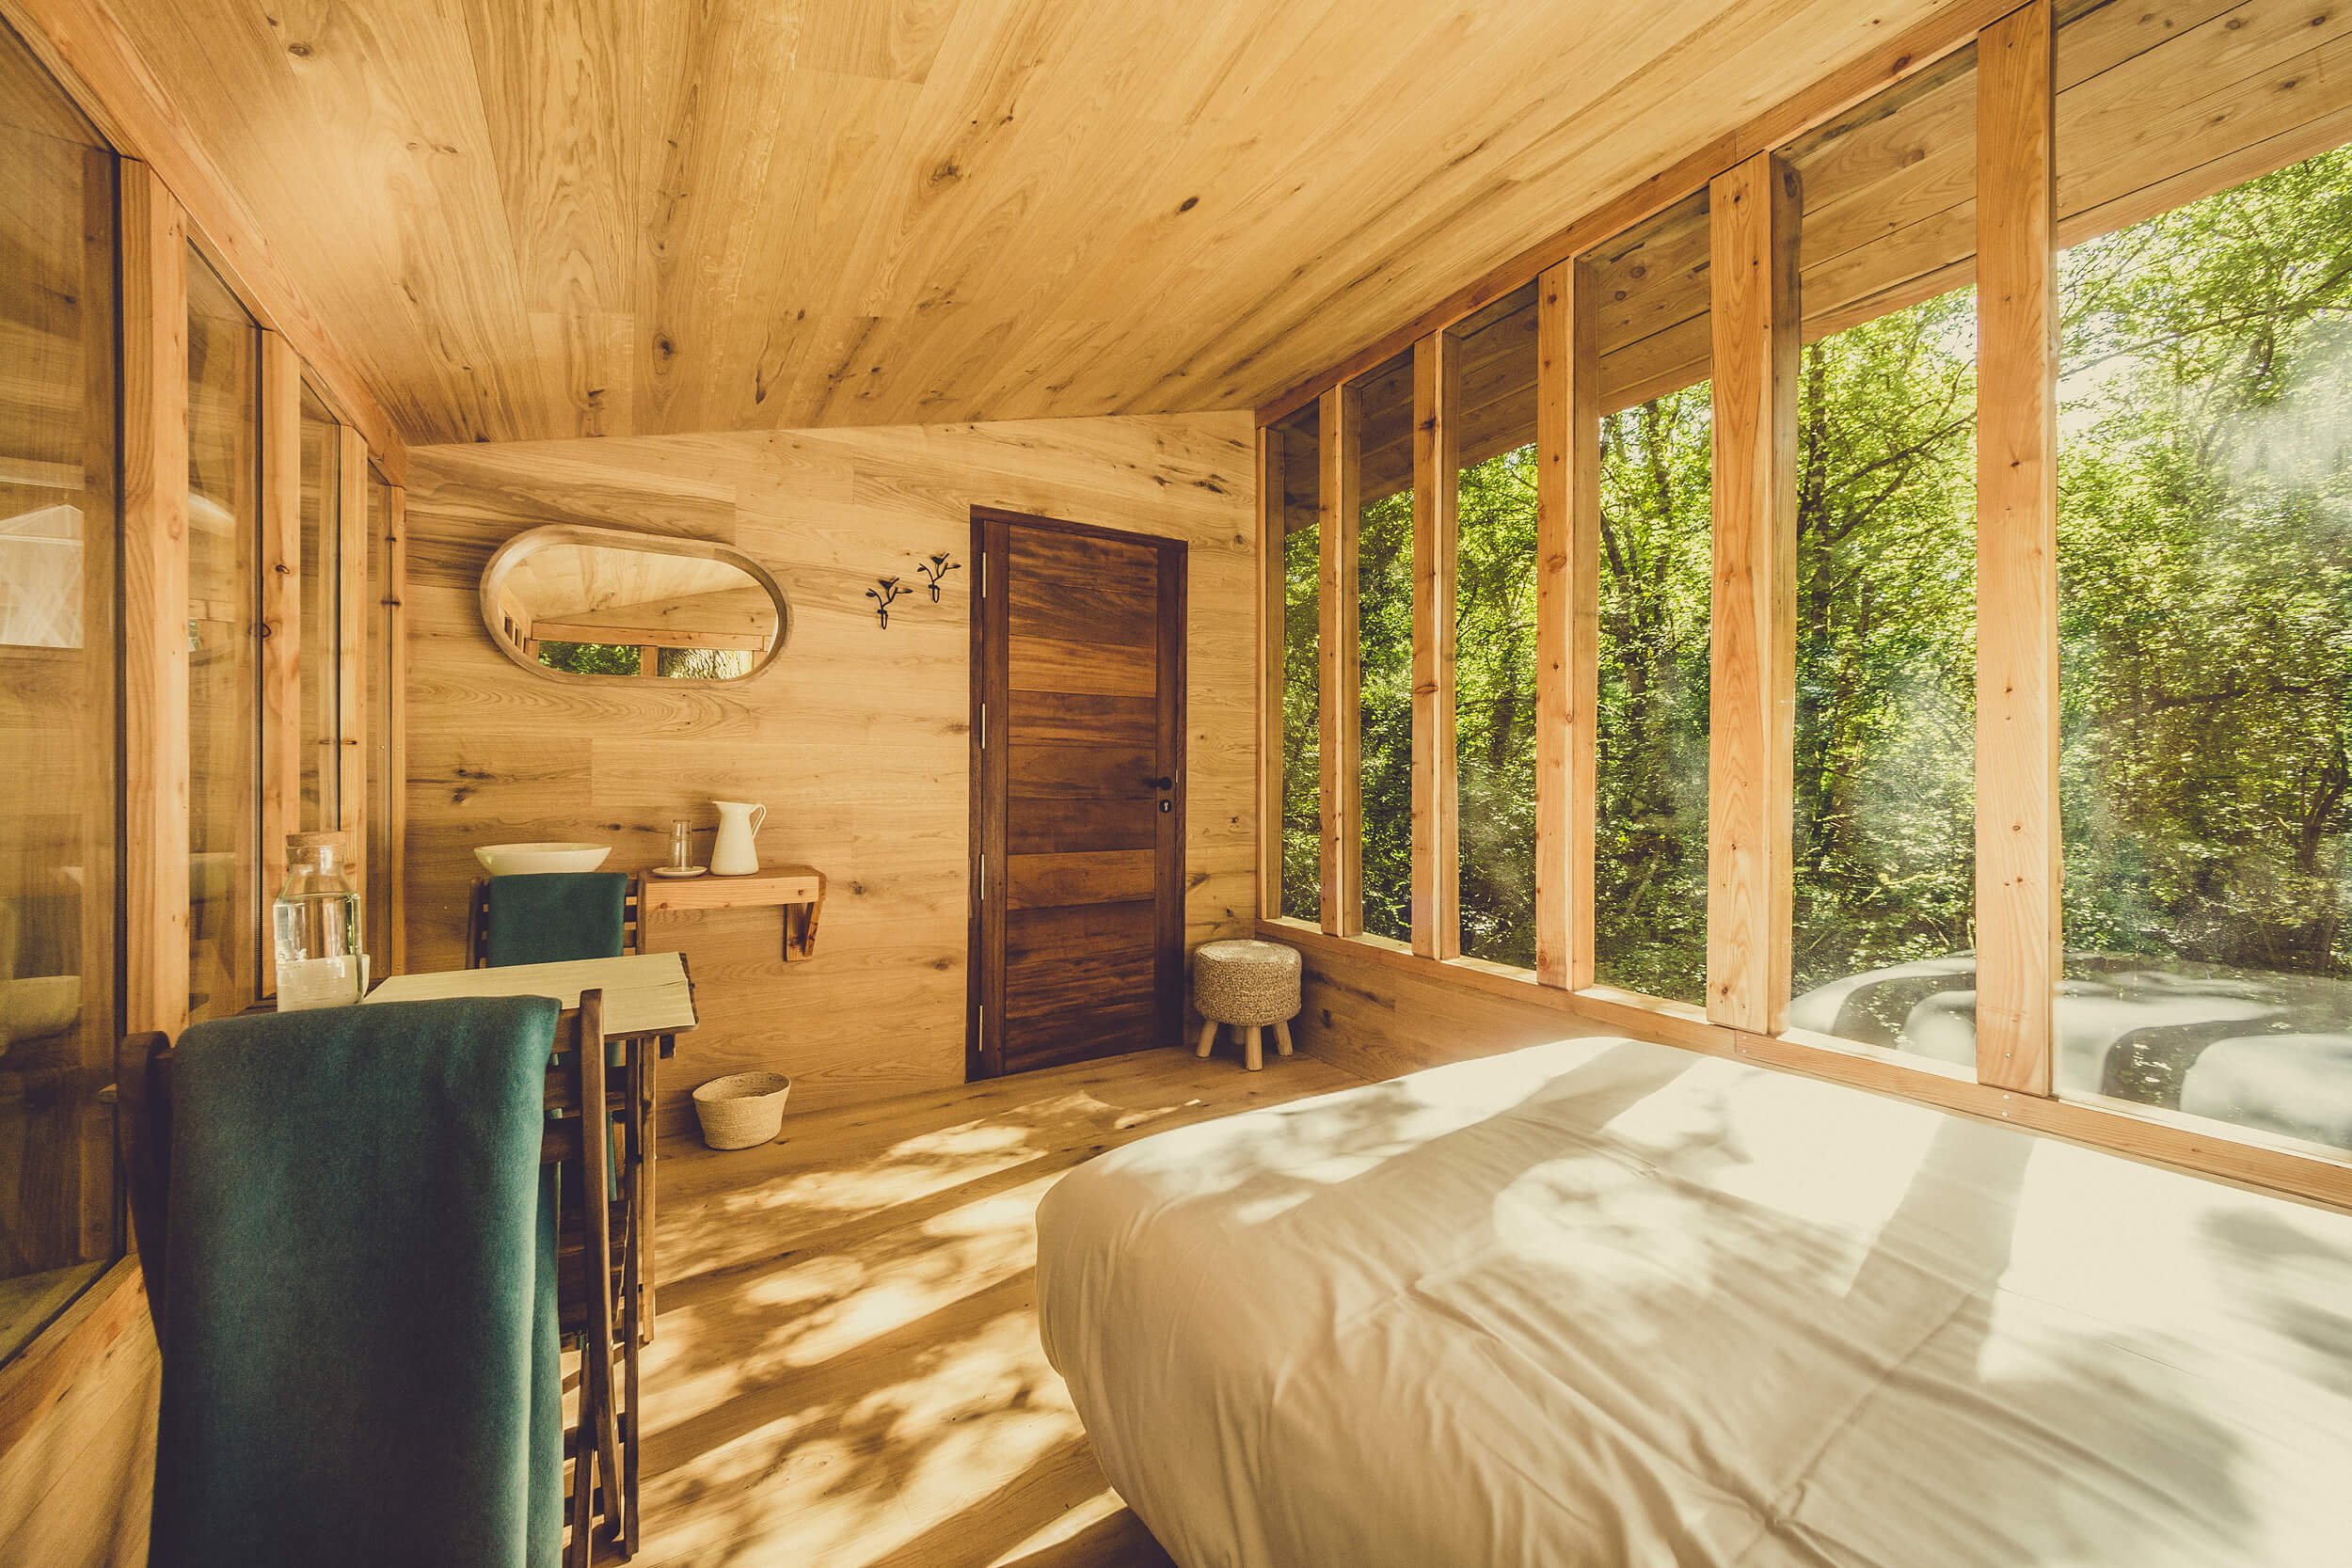 Escape to the forest- a look inside Basoa Suites' treehouses by MuruStudios advertising photographers in Madrid Barcelona Pamplona Spain 24.jpg